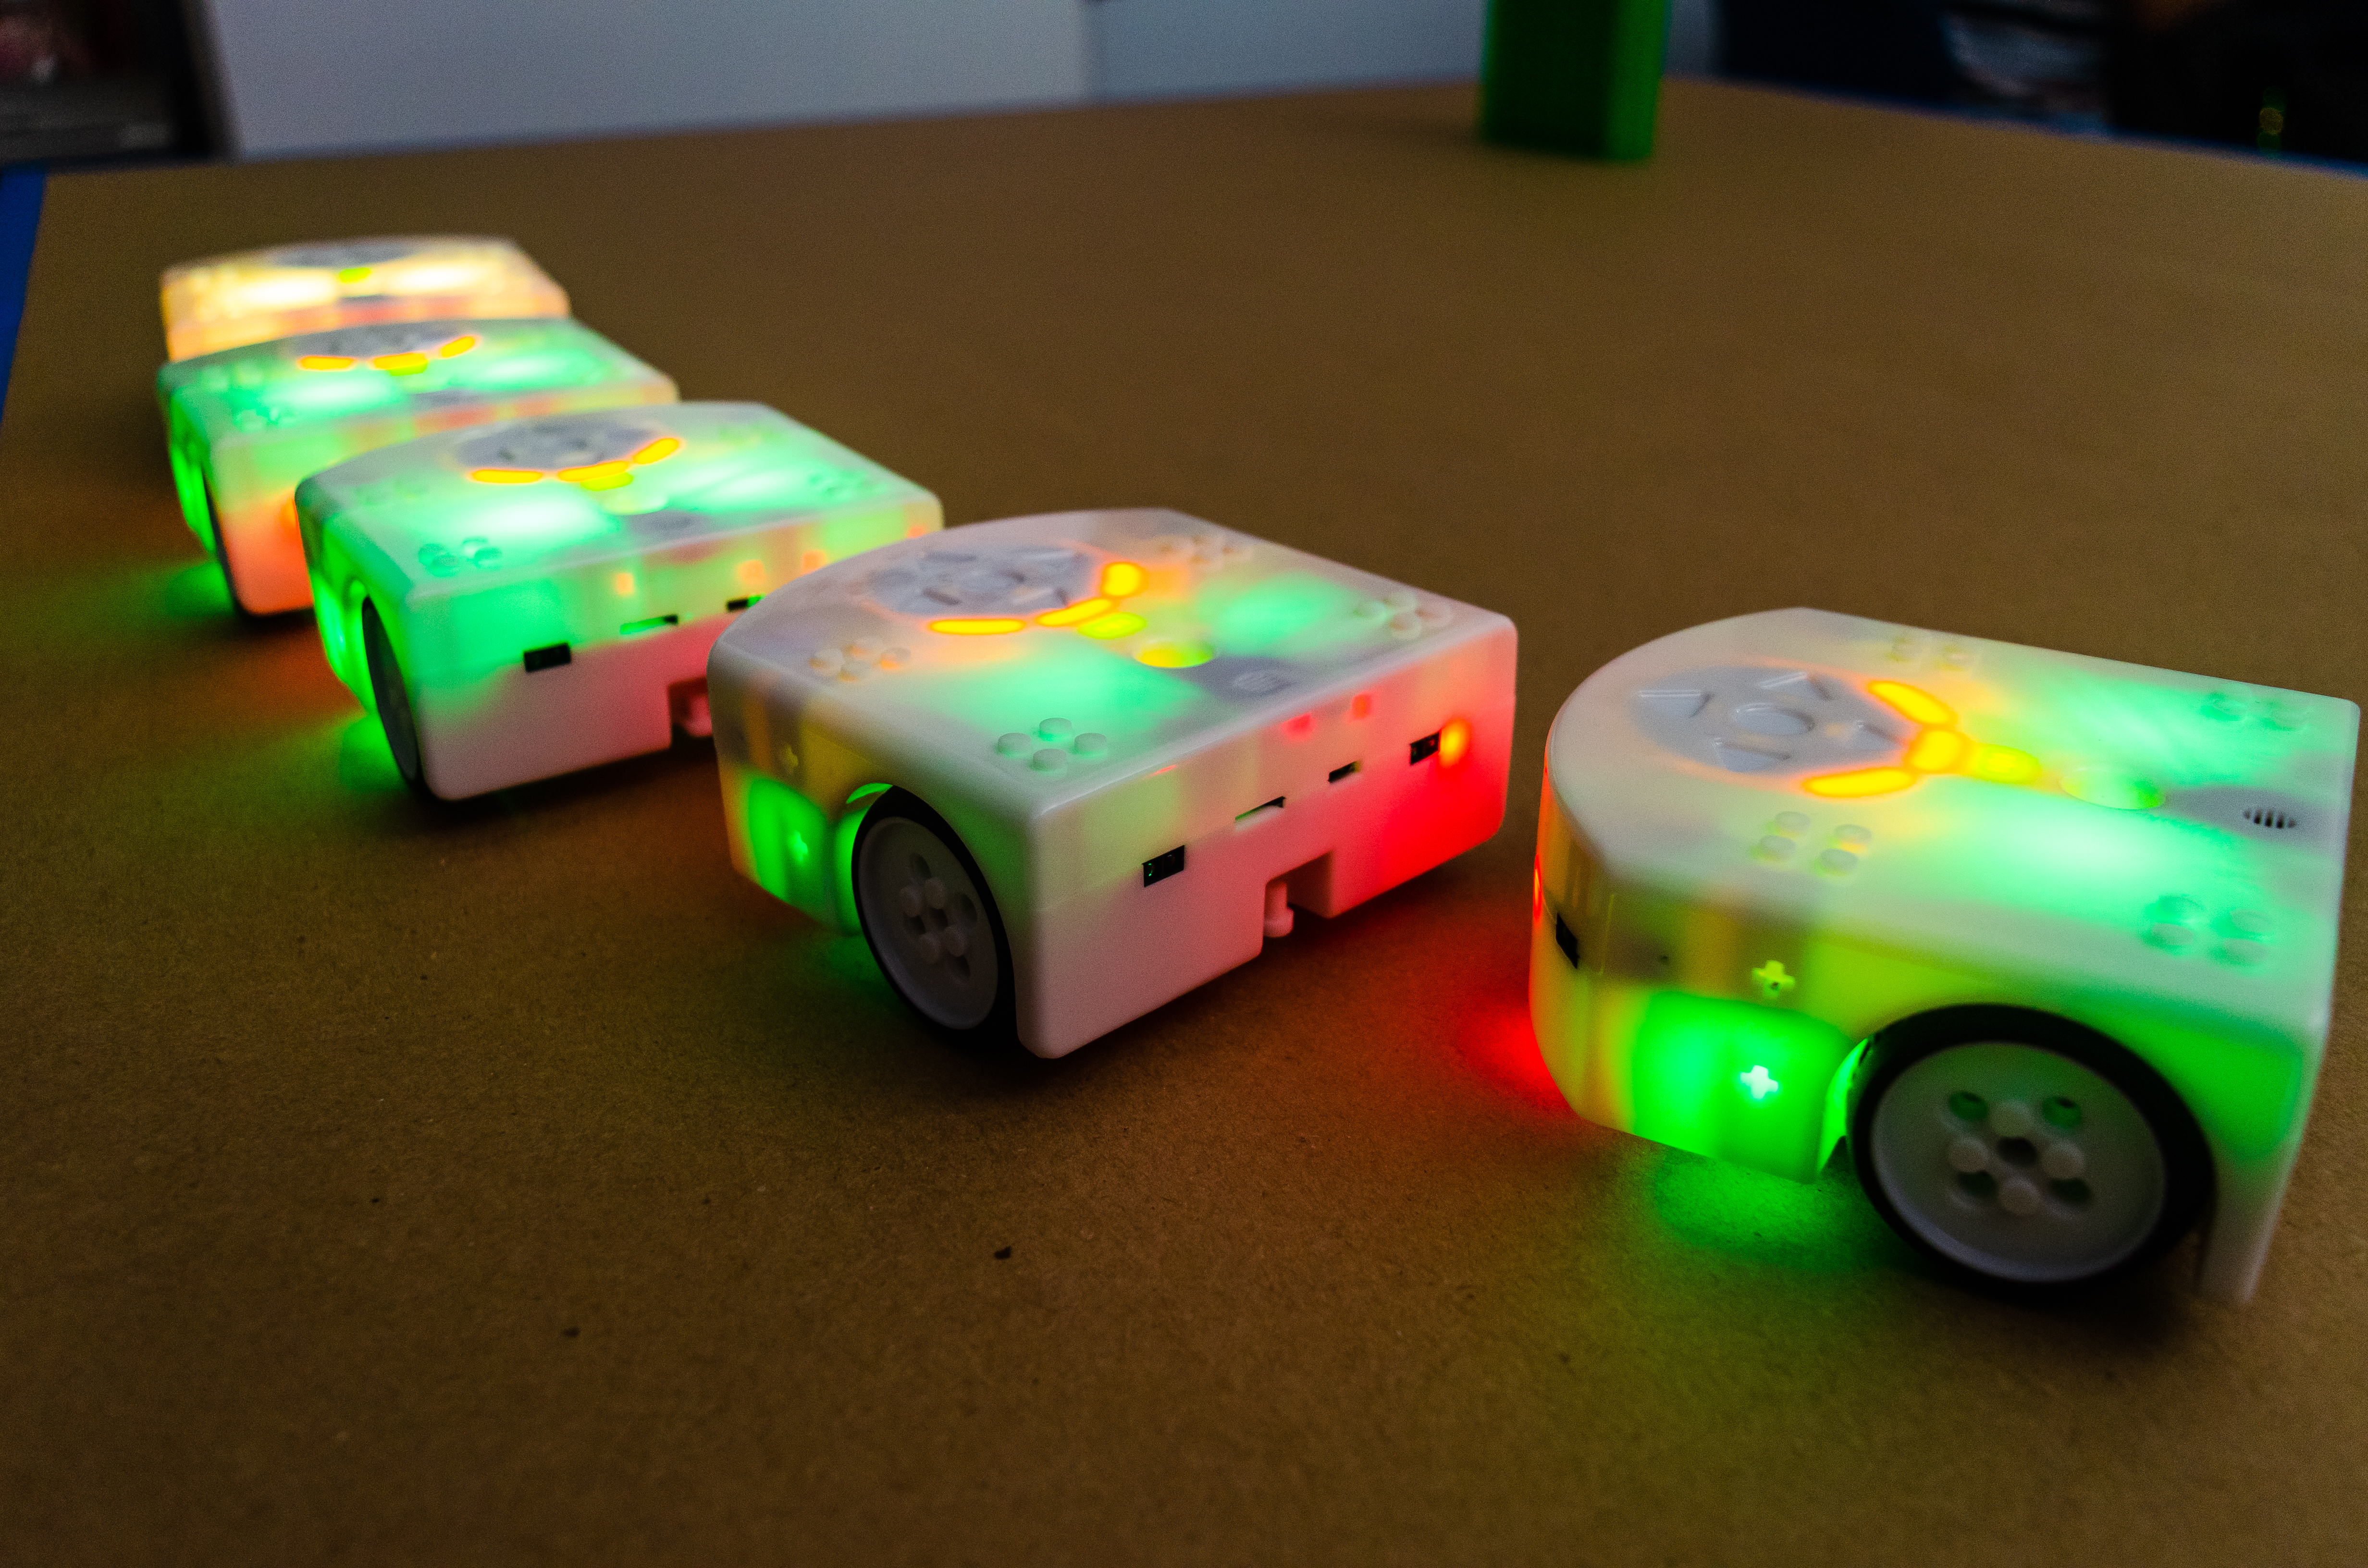 Educational toy robots move together in a convoy